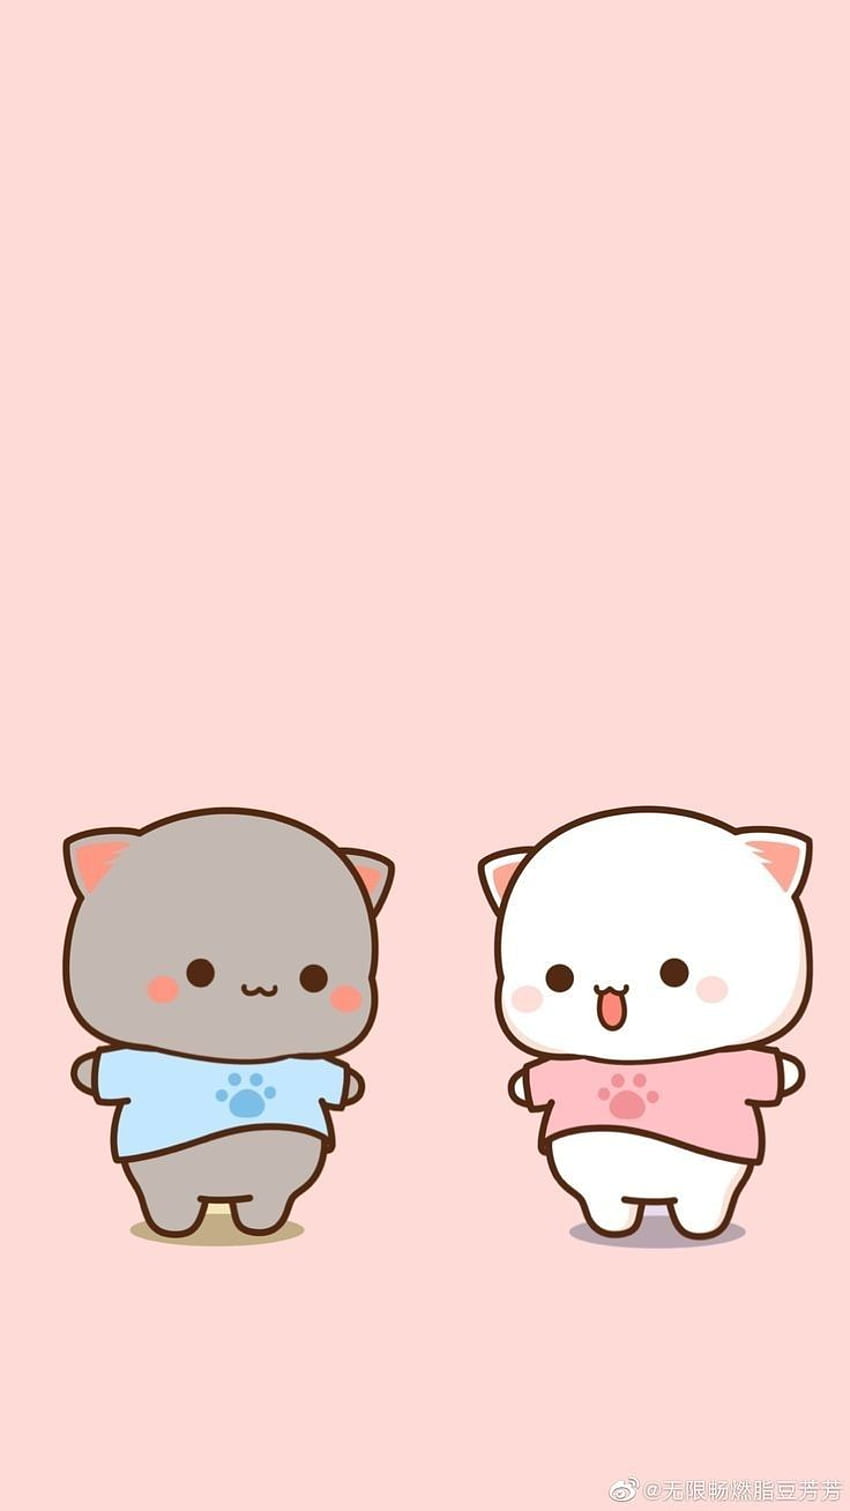 Download Outfit of the Day - Kawaii Anime Cat Wallpaper | Wallpapers.com